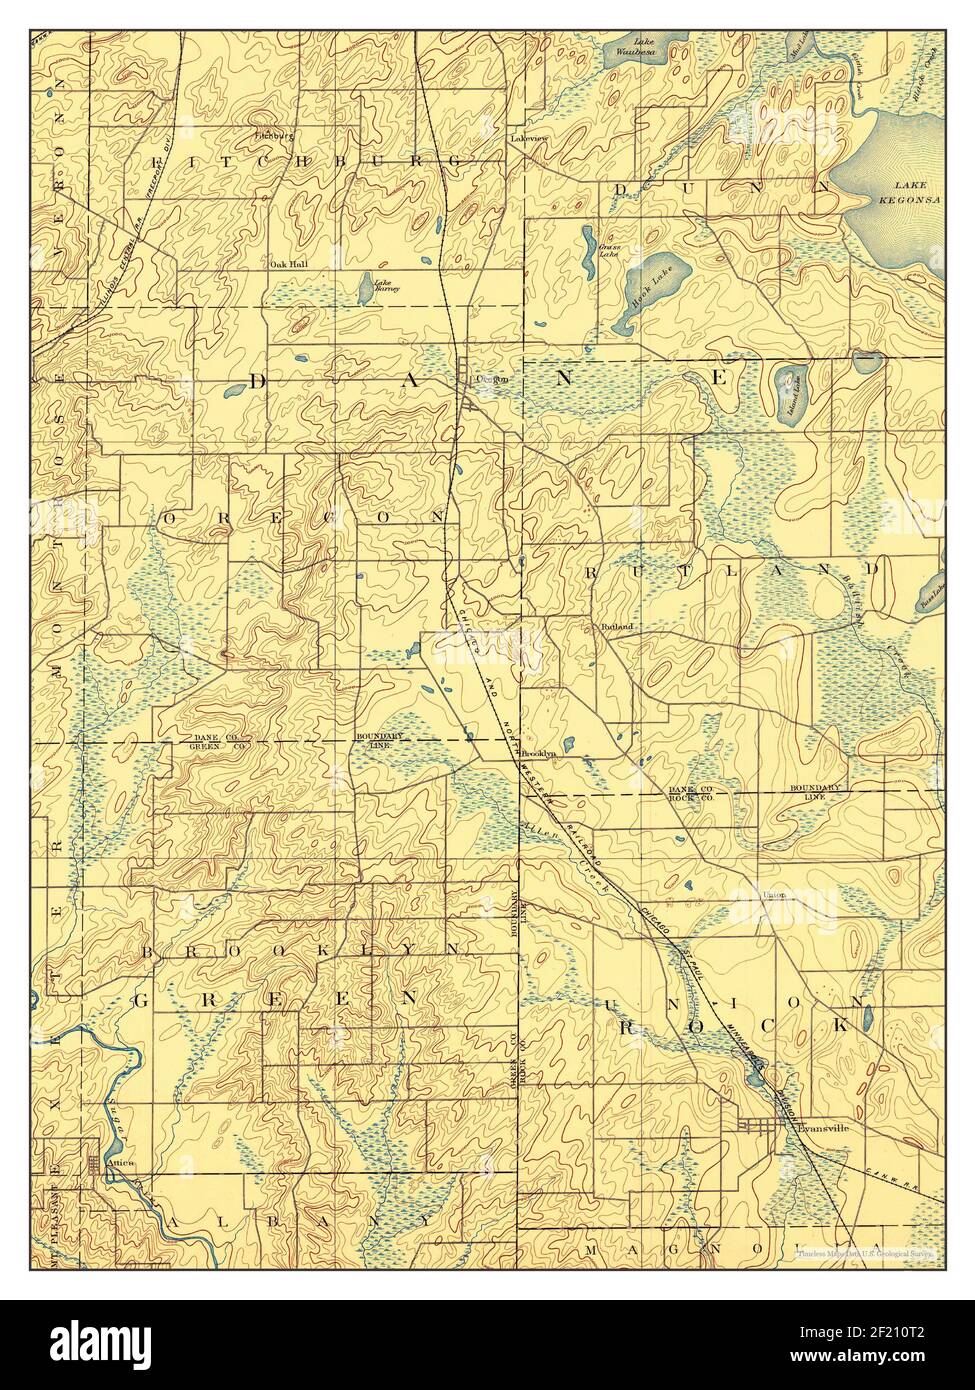 Evansville, Wisconsin, map 1894, 1:62500, United States of America by Timeless Maps, data U.S. Geological Survey Stock Photo